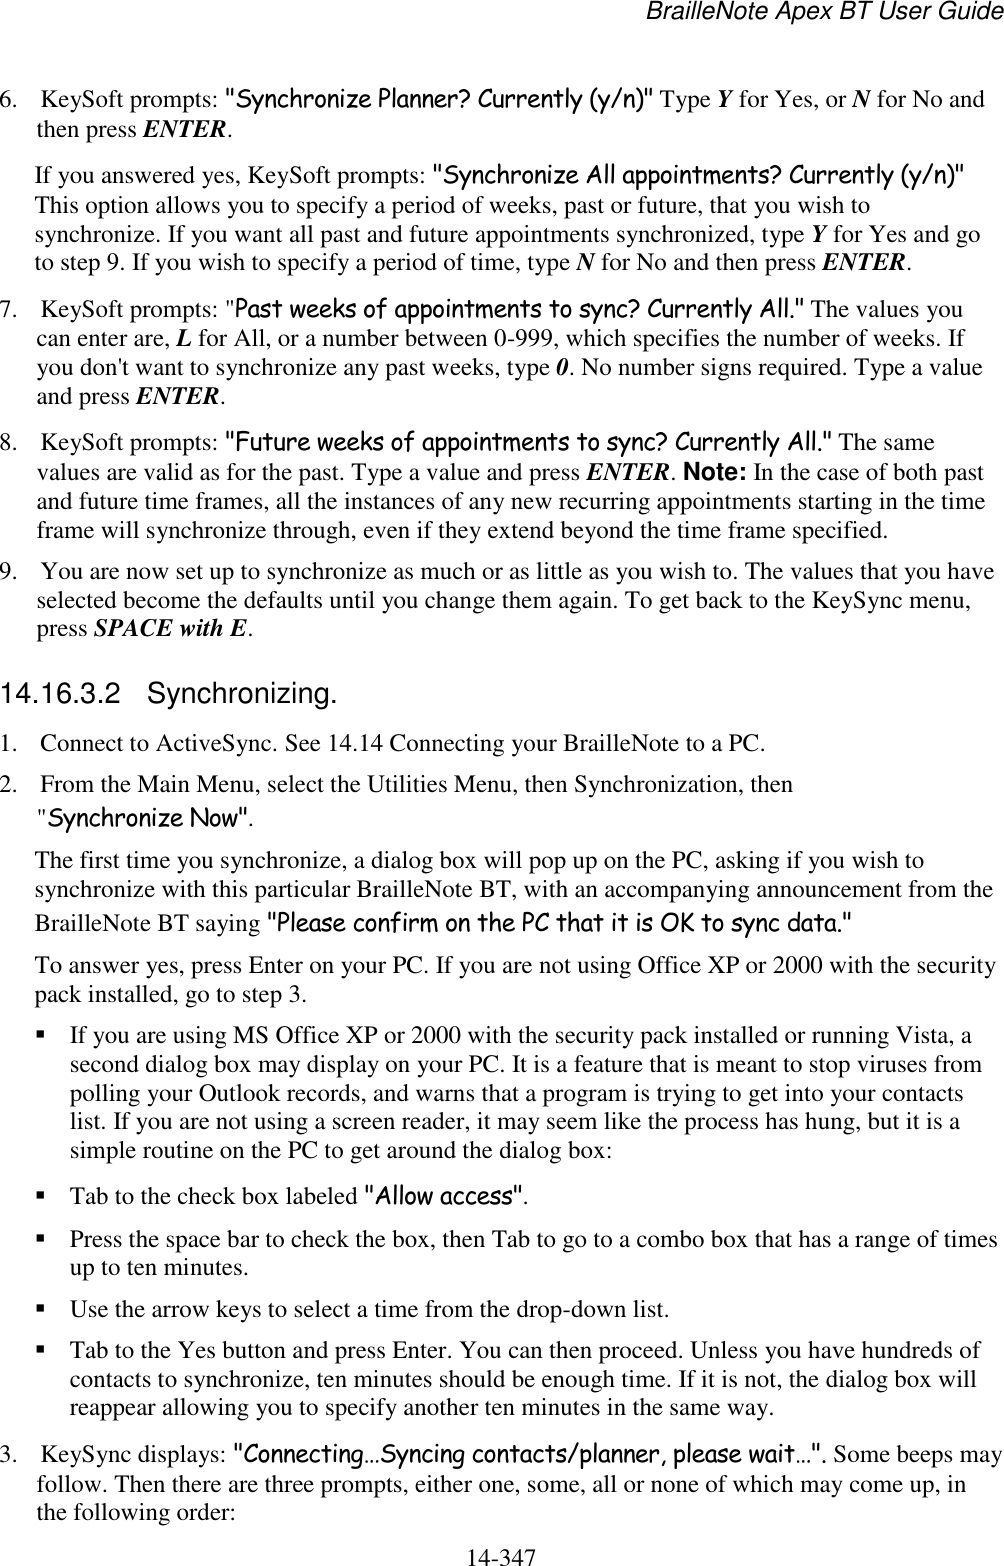 BrailleNote Apex BT User Guide   14-347   6. KeySoft prompts: &quot;Synchronize Planner? Currently (y/n)&quot; Type Y for Yes, or N for No and then press ENTER. If you answered yes, KeySoft prompts: &quot;Synchronize All appointments? Currently (y/n)&quot; This option allows you to specify a period of weeks, past or future, that you wish to synchronize. If you want all past and future appointments synchronized, type Y for Yes and go to step 9. If you wish to specify a period of time, type N for No and then press ENTER. 7. KeySoft prompts: &quot;Past weeks of appointments to sync? Currently All.&quot; The values you can enter are, L for All, or a number between 0-999, which specifies the number of weeks. If you don&apos;t want to synchronize any past weeks, type 0. No number signs required. Type a value and press ENTER. 8. KeySoft prompts: &quot;Future weeks of appointments to sync? Currently All.&quot; The same values are valid as for the past. Type a value and press ENTER. Note: In the case of both past and future time frames, all the instances of any new recurring appointments starting in the time frame will synchronize through, even if they extend beyond the time frame specified. 9. You are now set up to synchronize as much or as little as you wish to. The values that you have selected become the defaults until you change them again. To get back to the KeySync menu, press SPACE with E.  14.16.3.2  Synchronizing. 1. Connect to ActiveSync. See 14.14 Connecting your BrailleNote to a PC. 2. From the Main Menu, select the Utilities Menu, then Synchronization, then &quot;Synchronize Now&quot;. The first time you synchronize, a dialog box will pop up on the PC, asking if you wish to synchronize with this particular BrailleNote BT, with an accompanying announcement from the BrailleNote BT saying &quot;Please confirm on the PC that it is OK to sync data.&quot;  To answer yes, press Enter on your PC. If you are not using Office XP or 2000 with the security pack installed, go to step 3.  If you are using MS Office XP or 2000 with the security pack installed or running Vista, a second dialog box may display on your PC. It is a feature that is meant to stop viruses from polling your Outlook records, and warns that a program is trying to get into your contacts list. If you are not using a screen reader, it may seem like the process has hung, but it is a simple routine on the PC to get around the dialog box:  Tab to the check box labeled &quot;Allow access&quot;.  Press the space bar to check the box, then Tab to go to a combo box that has a range of times up to ten minutes.  Use the arrow keys to select a time from the drop-down list.  Tab to the Yes button and press Enter. You can then proceed. Unless you have hundreds of contacts to synchronize, ten minutes should be enough time. If it is not, the dialog box will reappear allowing you to specify another ten minutes in the same way. 3. KeySync displays: &quot;Connecting…Syncing contacts/planner, please wait…&quot;. Some beeps may follow. Then there are three prompts, either one, some, all or none of which may come up, in the following order: 